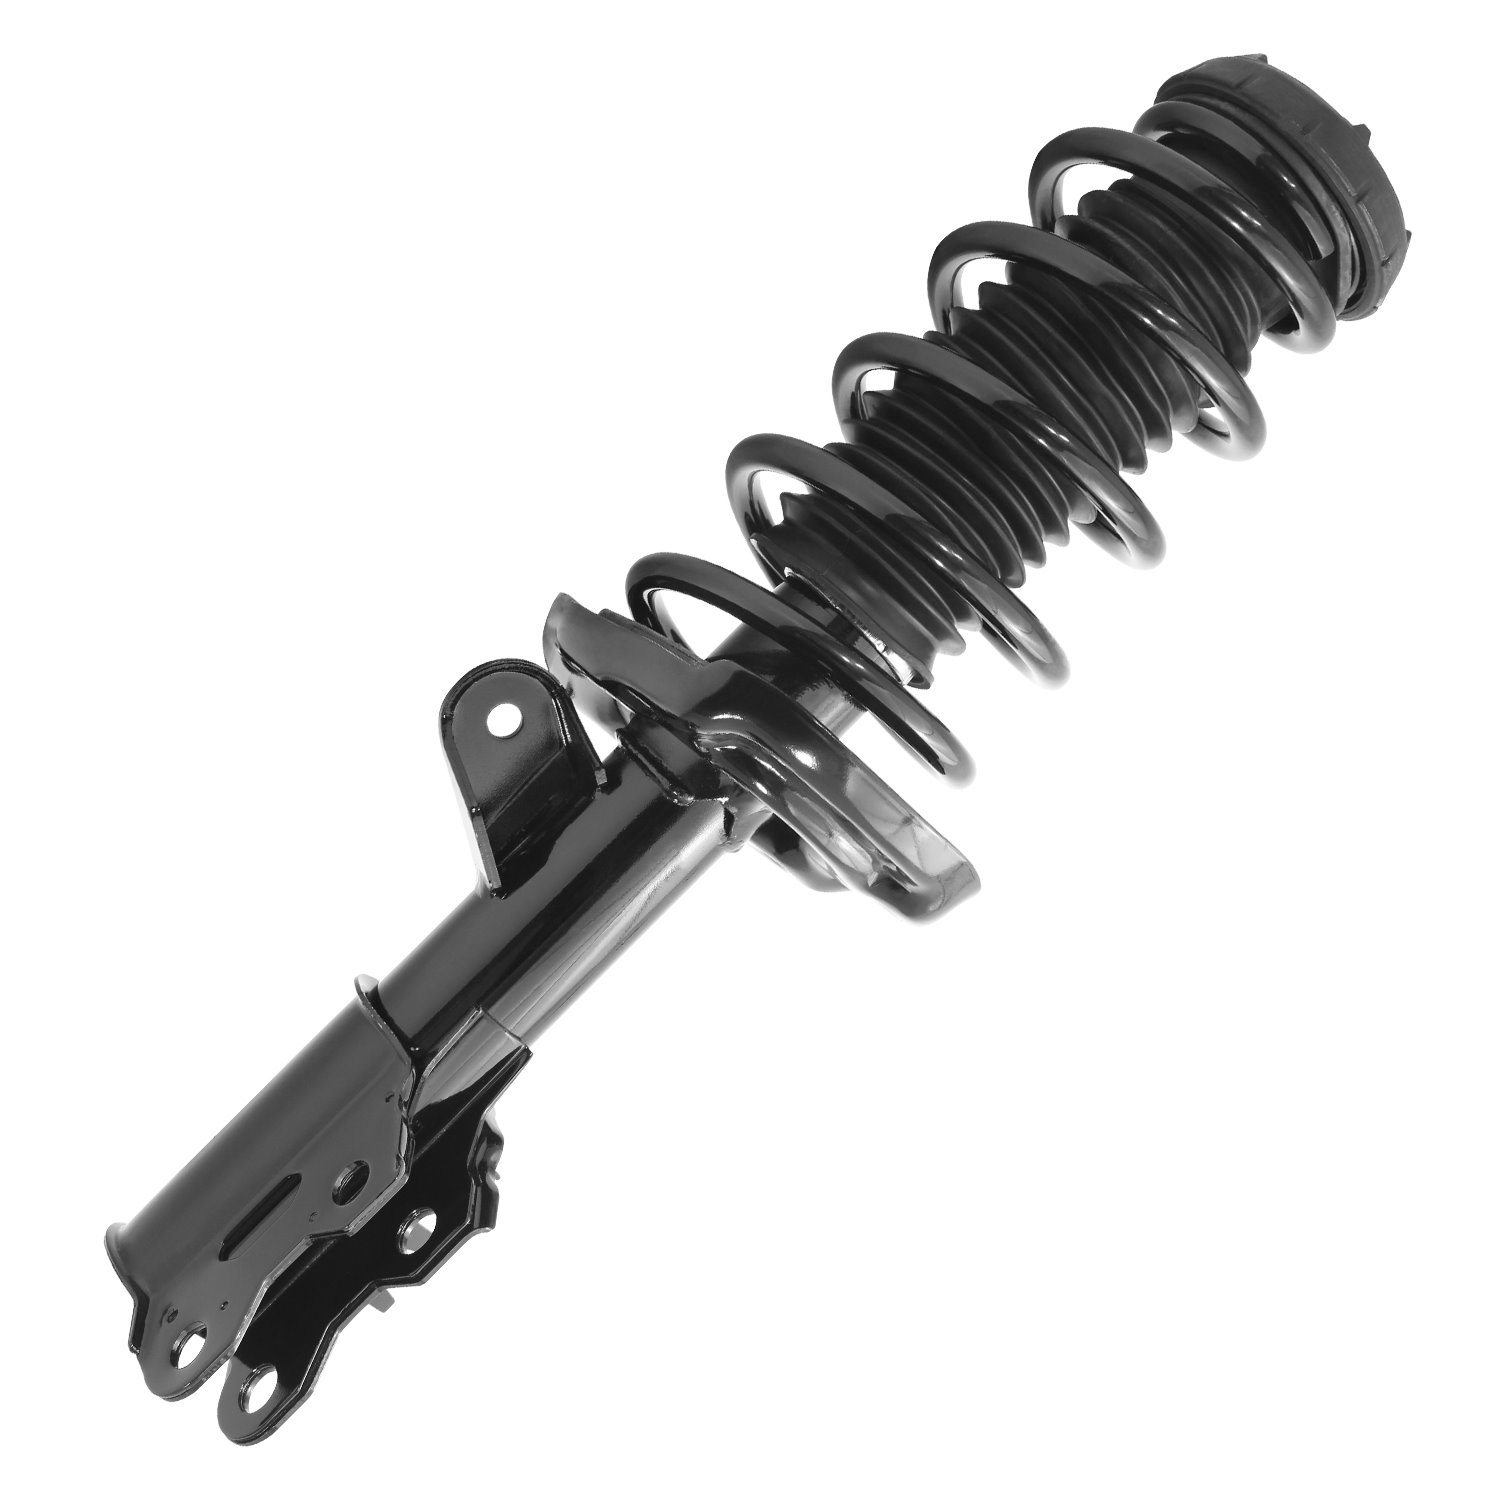 11718 Suspension Strut & Coil Spring Assembly Fits Select Buick Encore, Chevy Trax